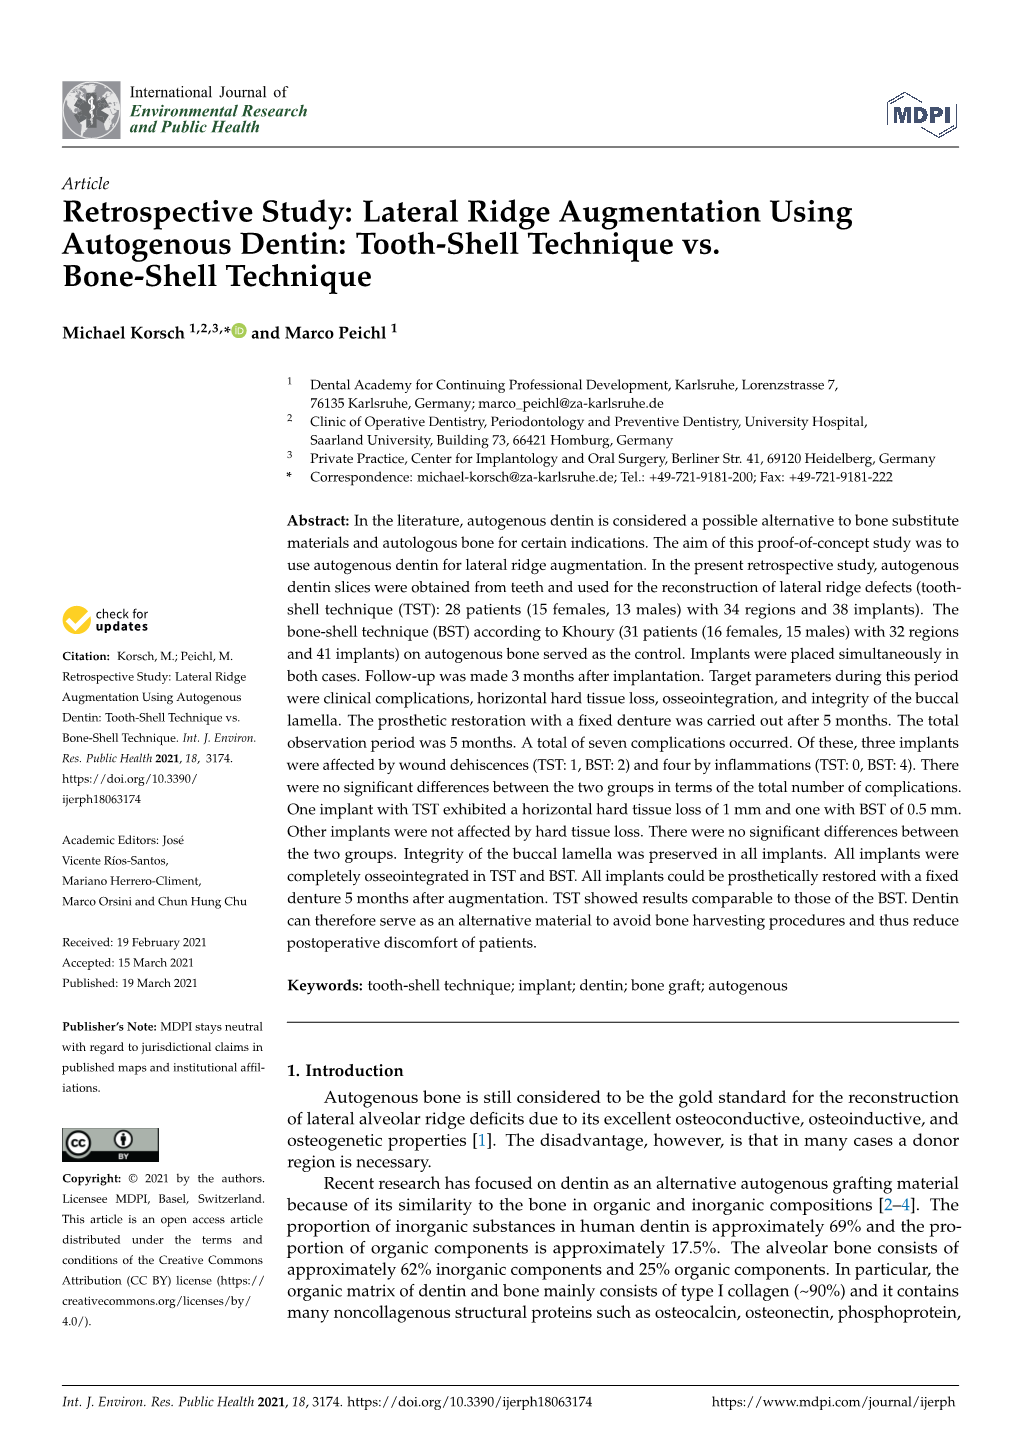 Lateral Ridge Augmentation Using Autogenous Dentin: Tooth-Shell Technique Vs